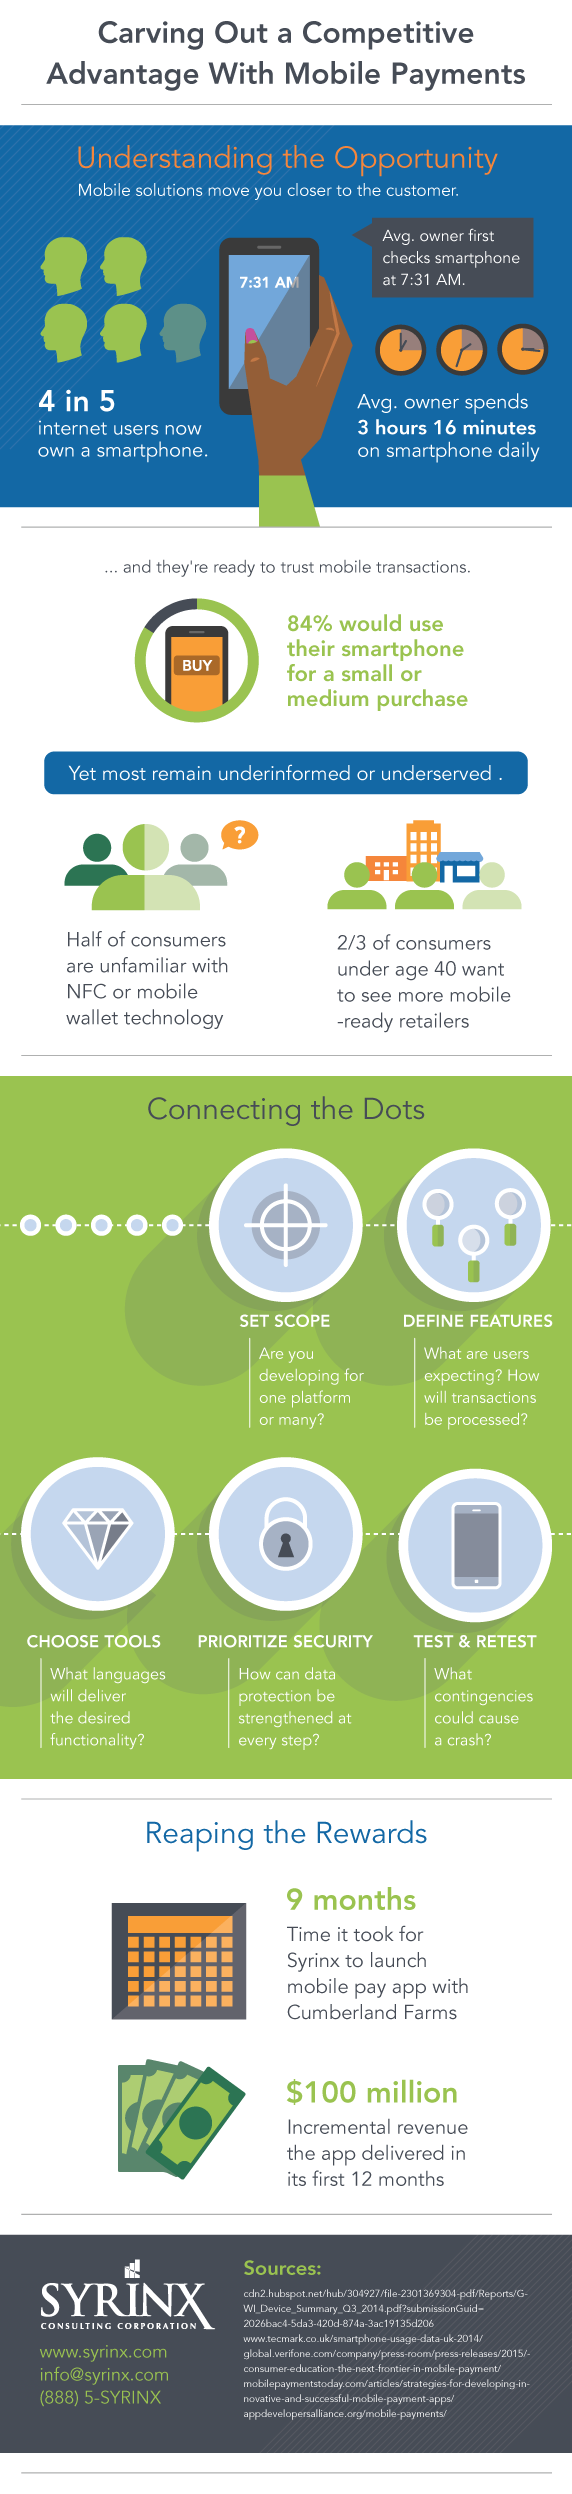 Competitive Advantage with Mobile Payments Infographic